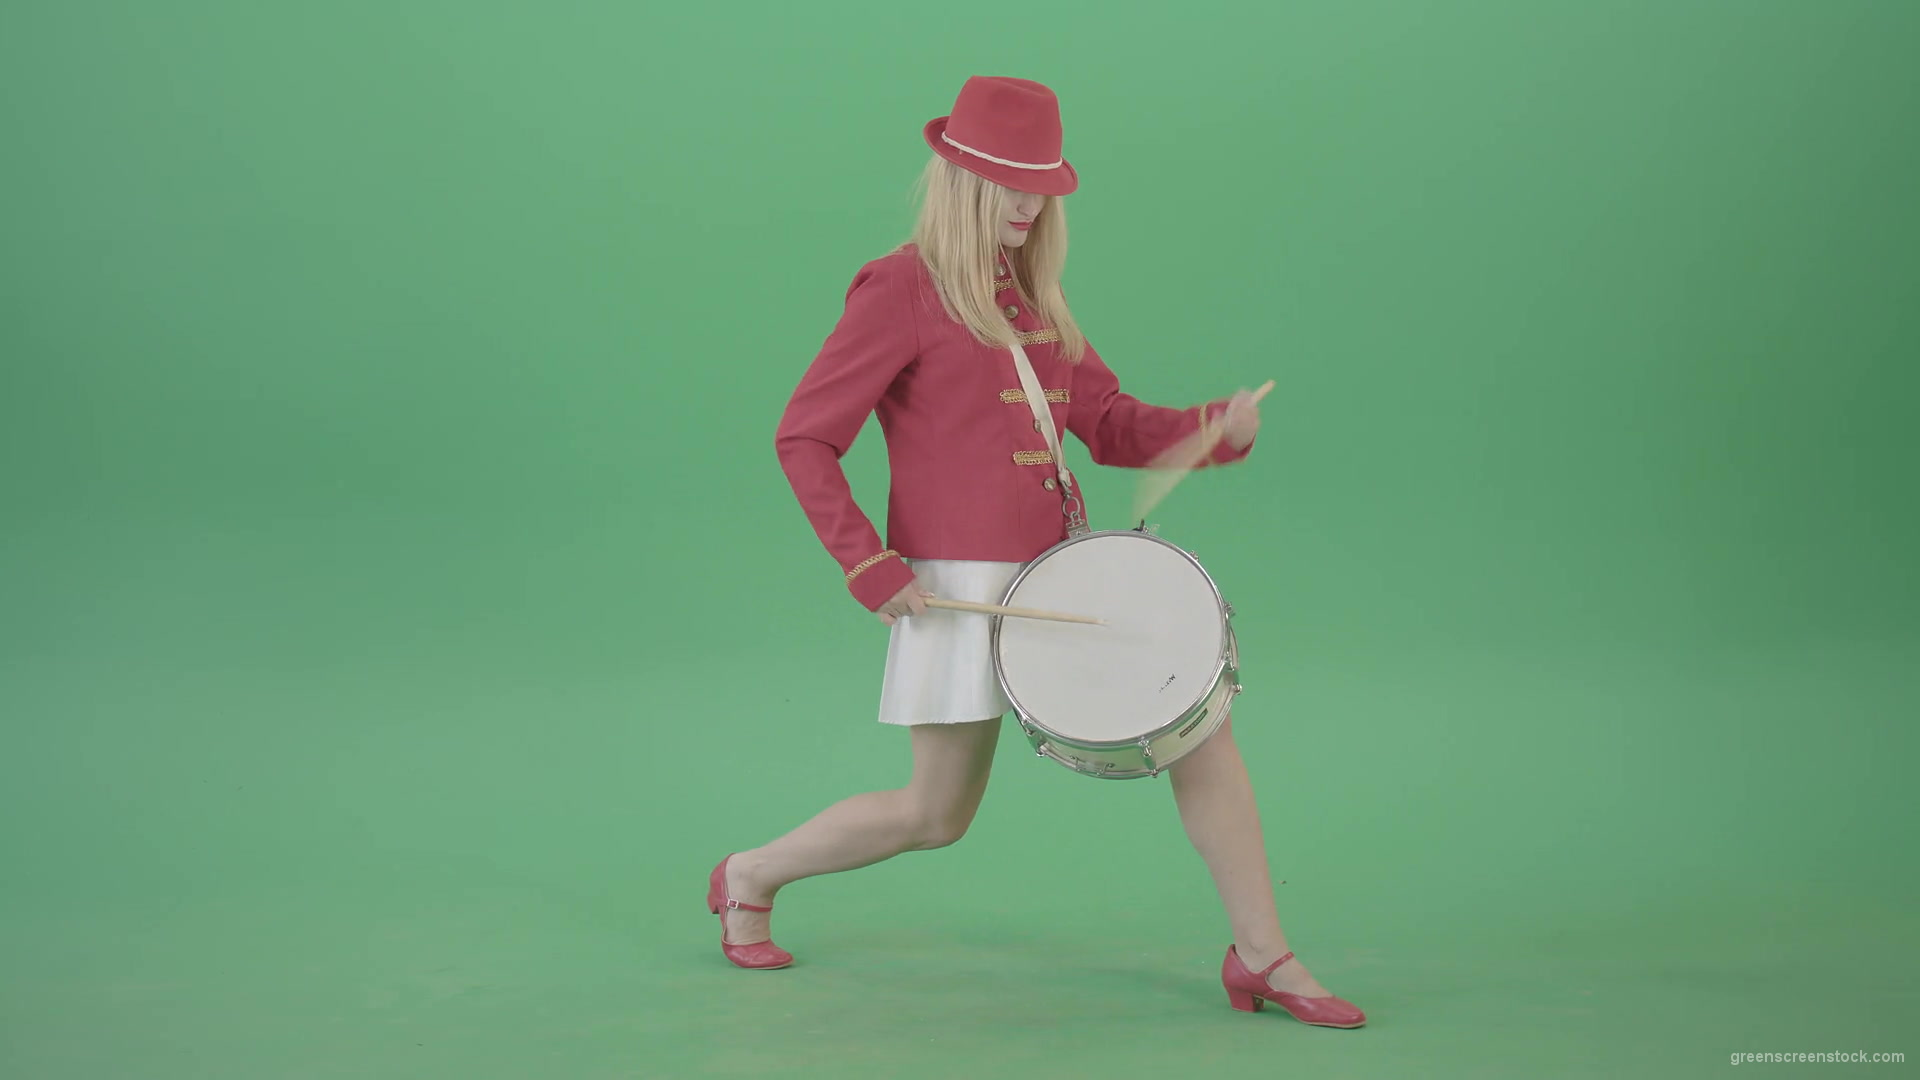 Blonde-Girl-in-Red-Uniform-making-beats-on-music-drum-instrument-in-active-pose-on-green-screen-4K-Video-Footage-1920_004 Green Screen Stock